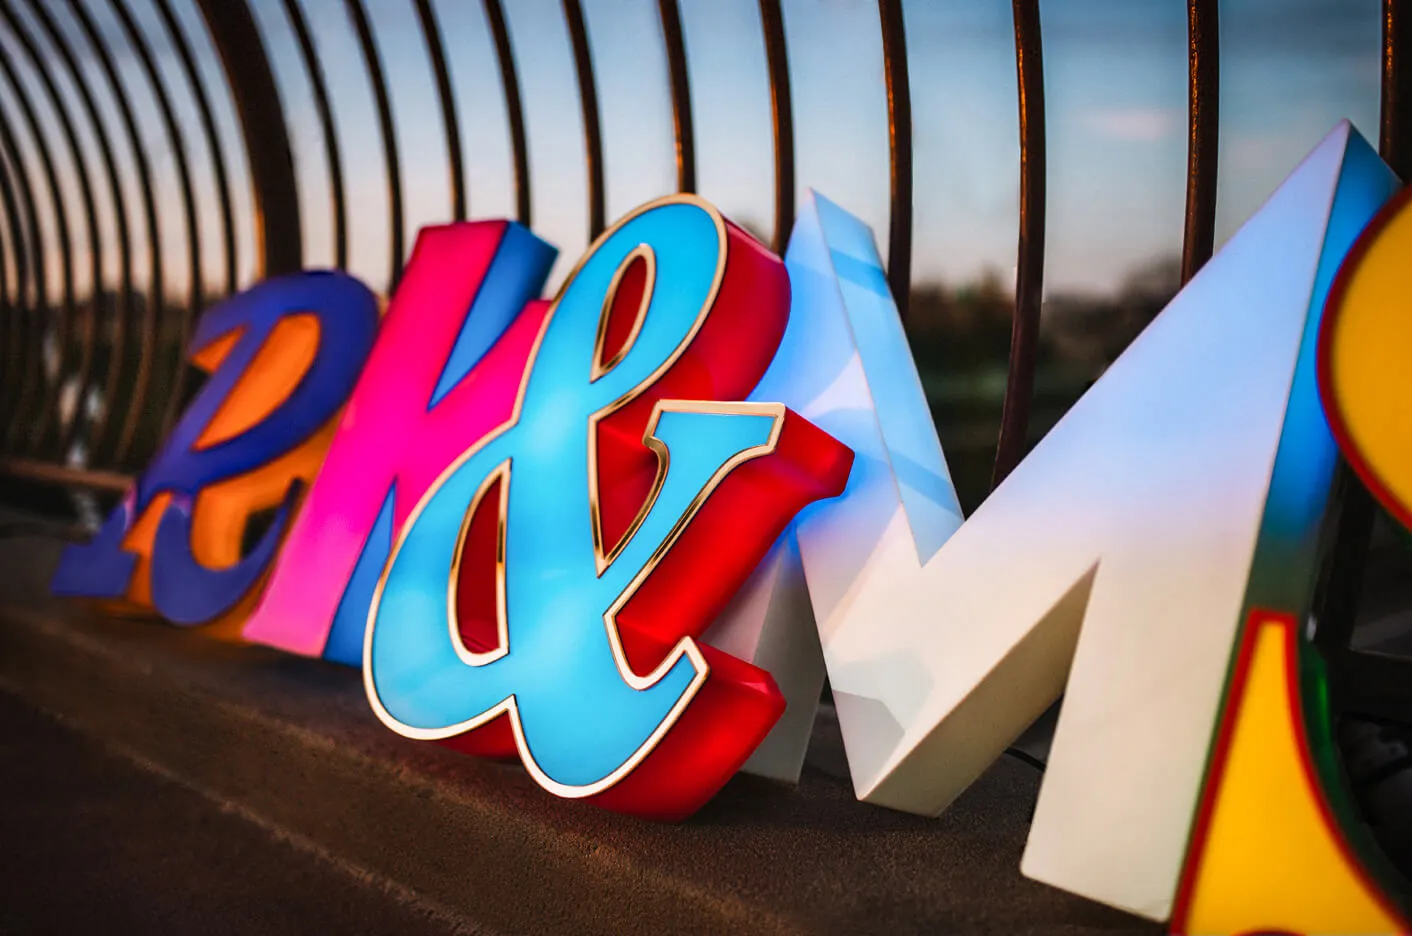 Illuminated letters made entirely of plexiglass